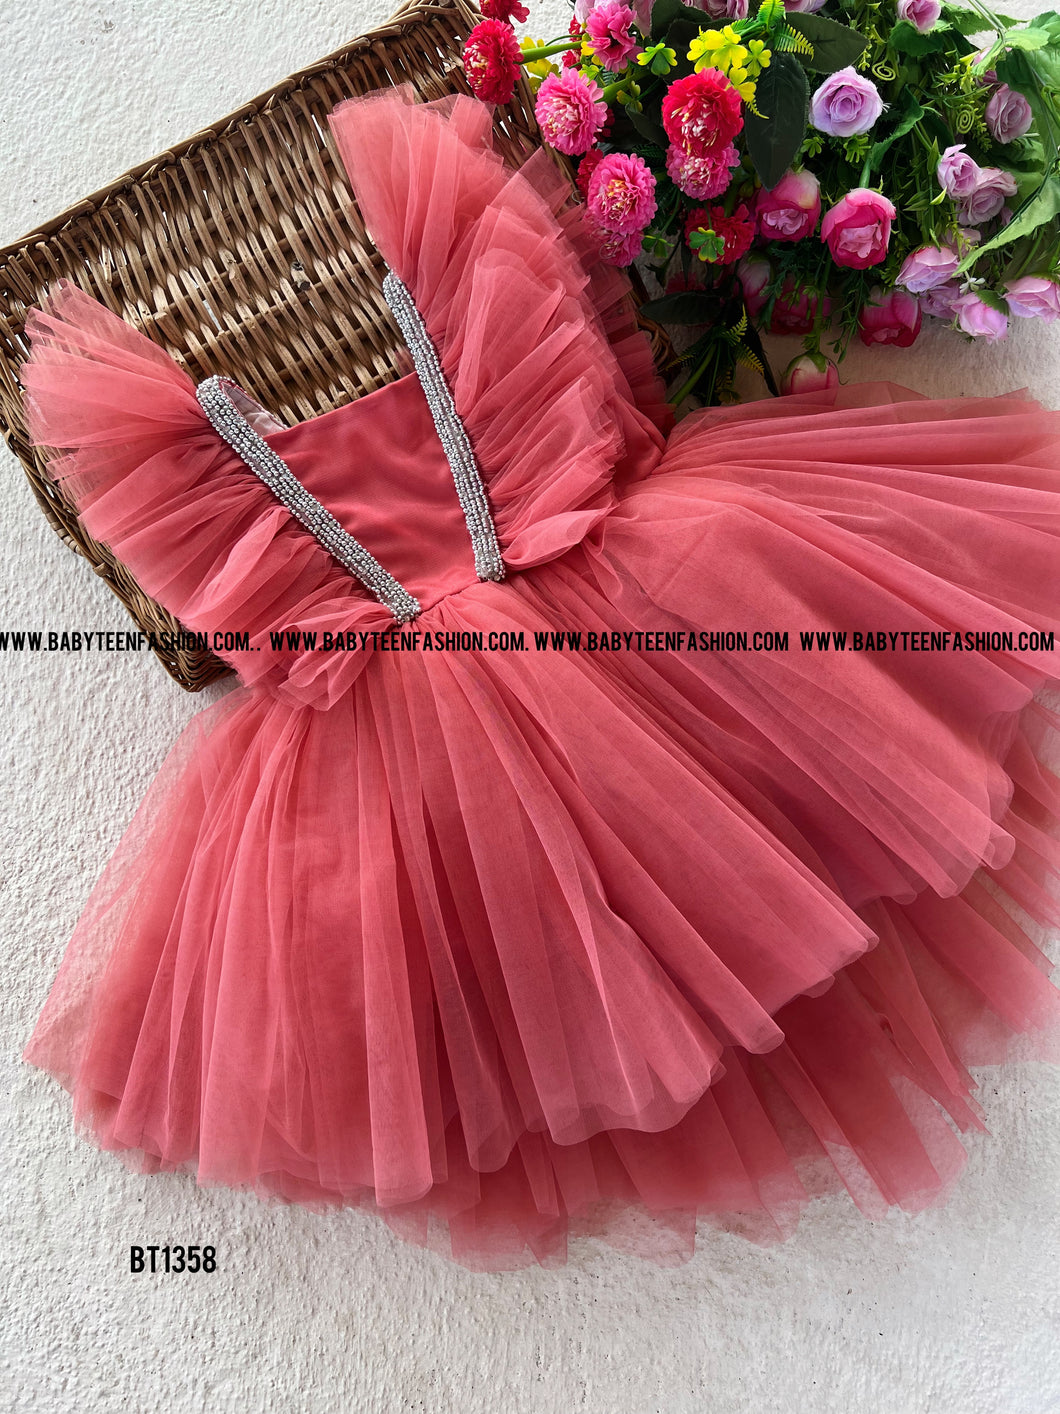 BT1358 Coral Enchantment Flair Dress - A Whirl of Delight for Tiny Dancers